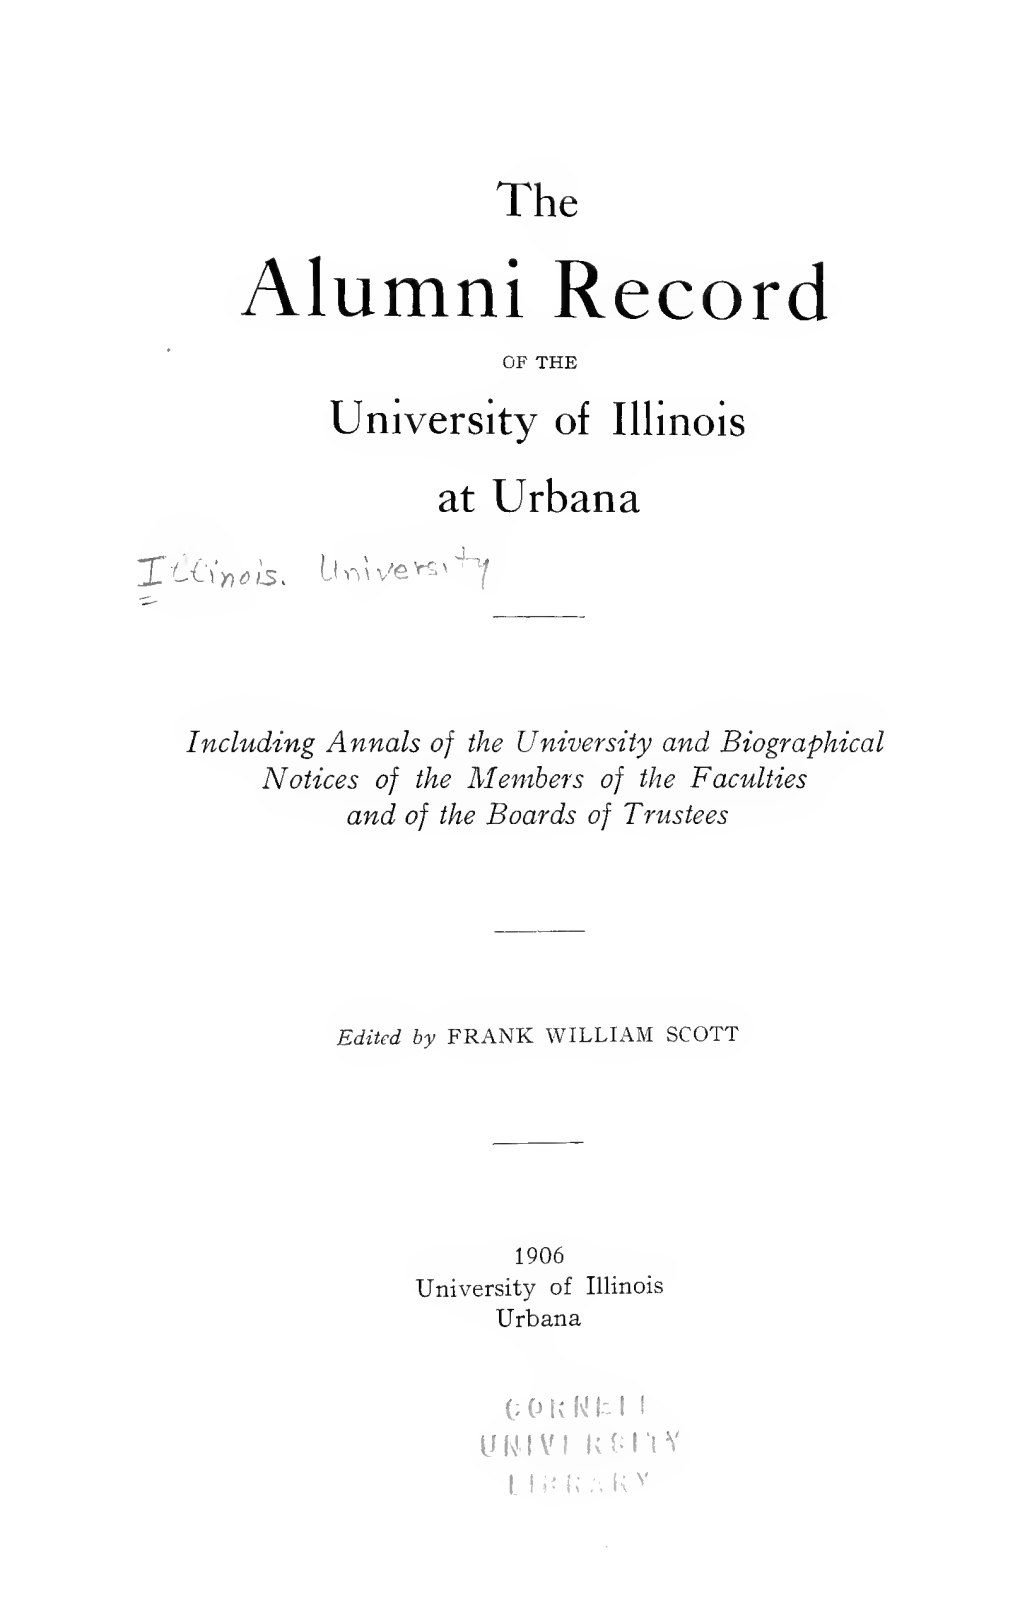 The Alumni Record of the University of Illinois at Urbana; Including Annals